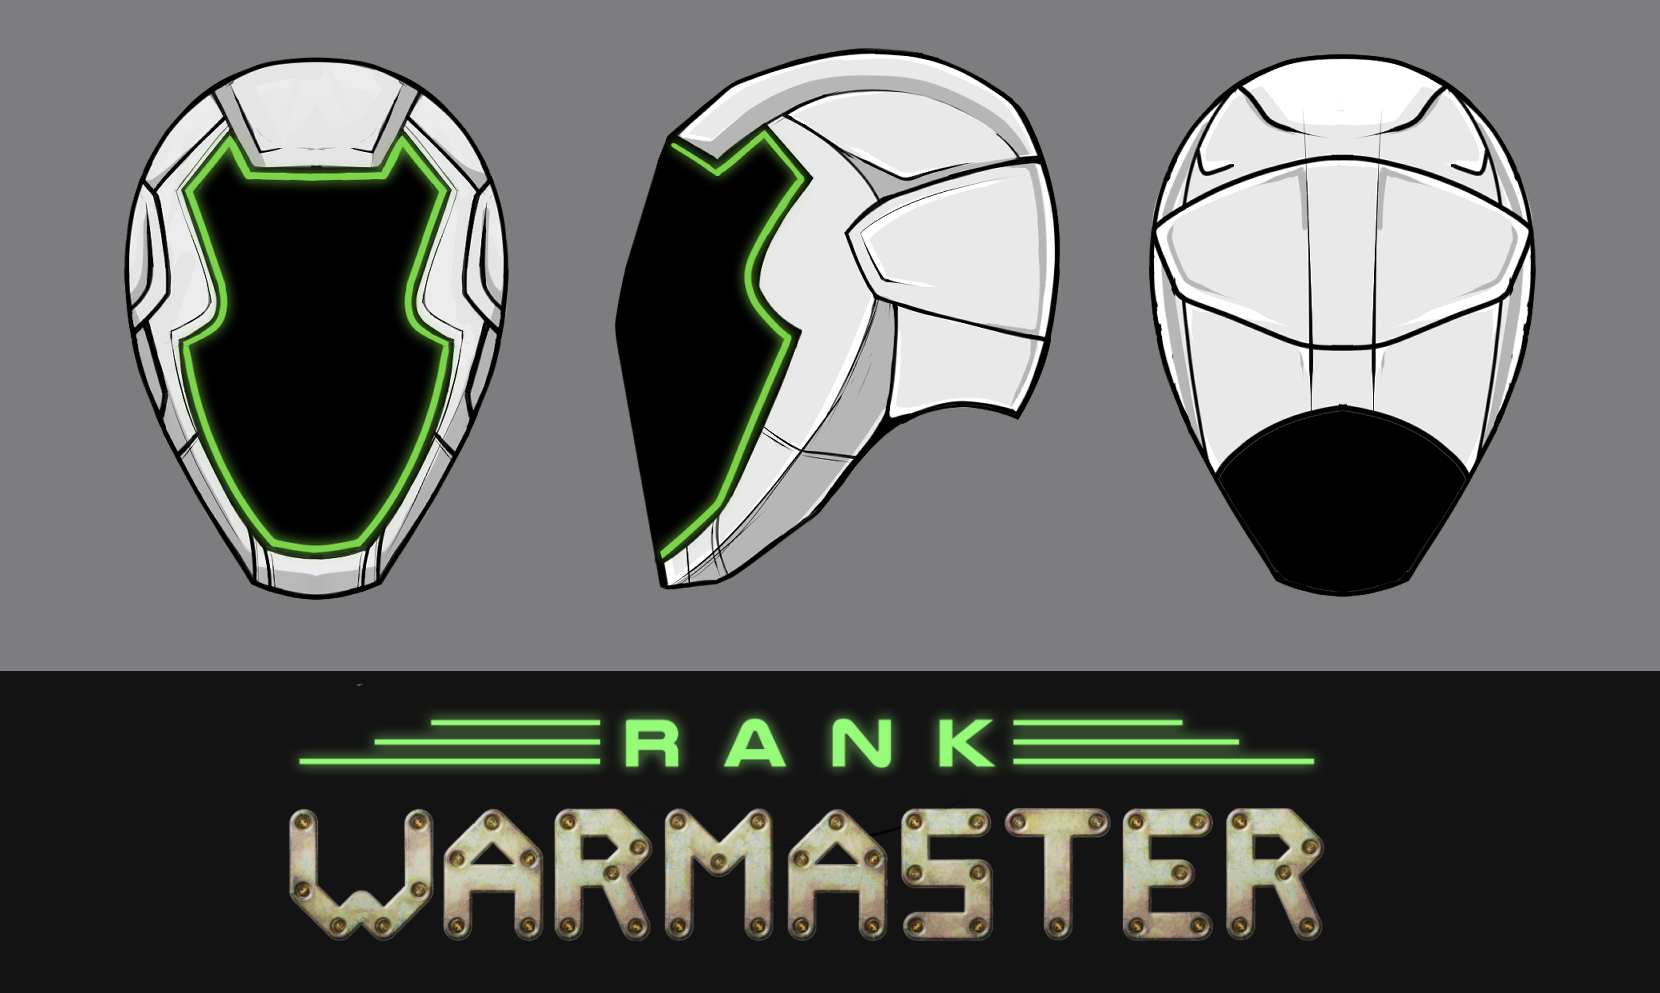 The Warmaster&apos;s character reference pt 1